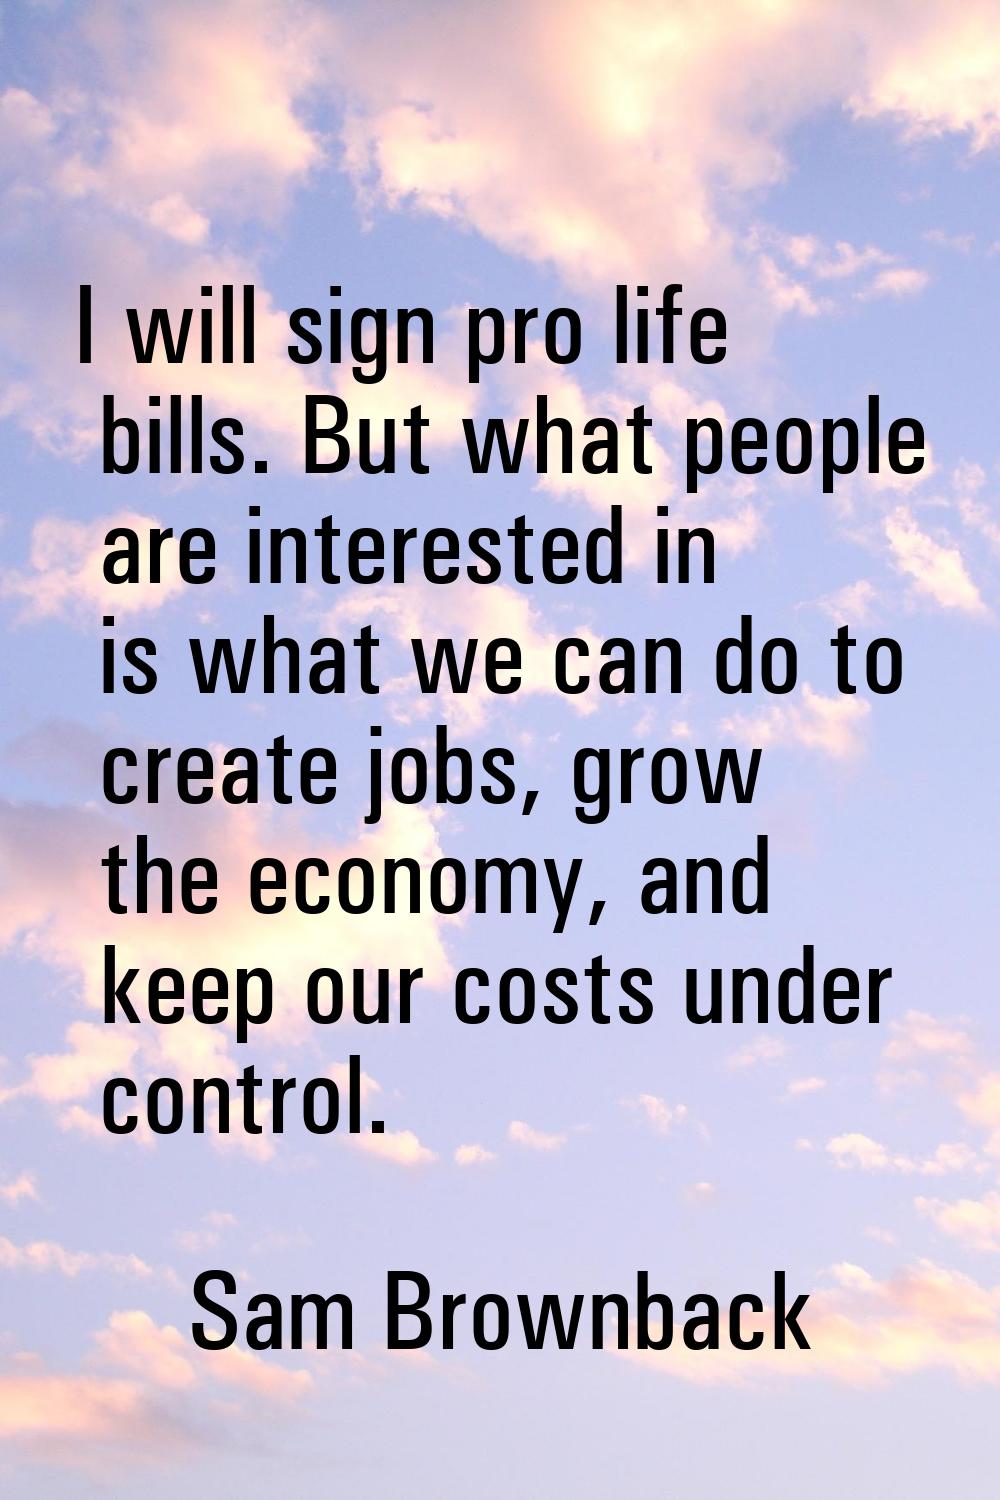 I will sign pro life bills. But what people are interested in is what we can do to create jobs, gro